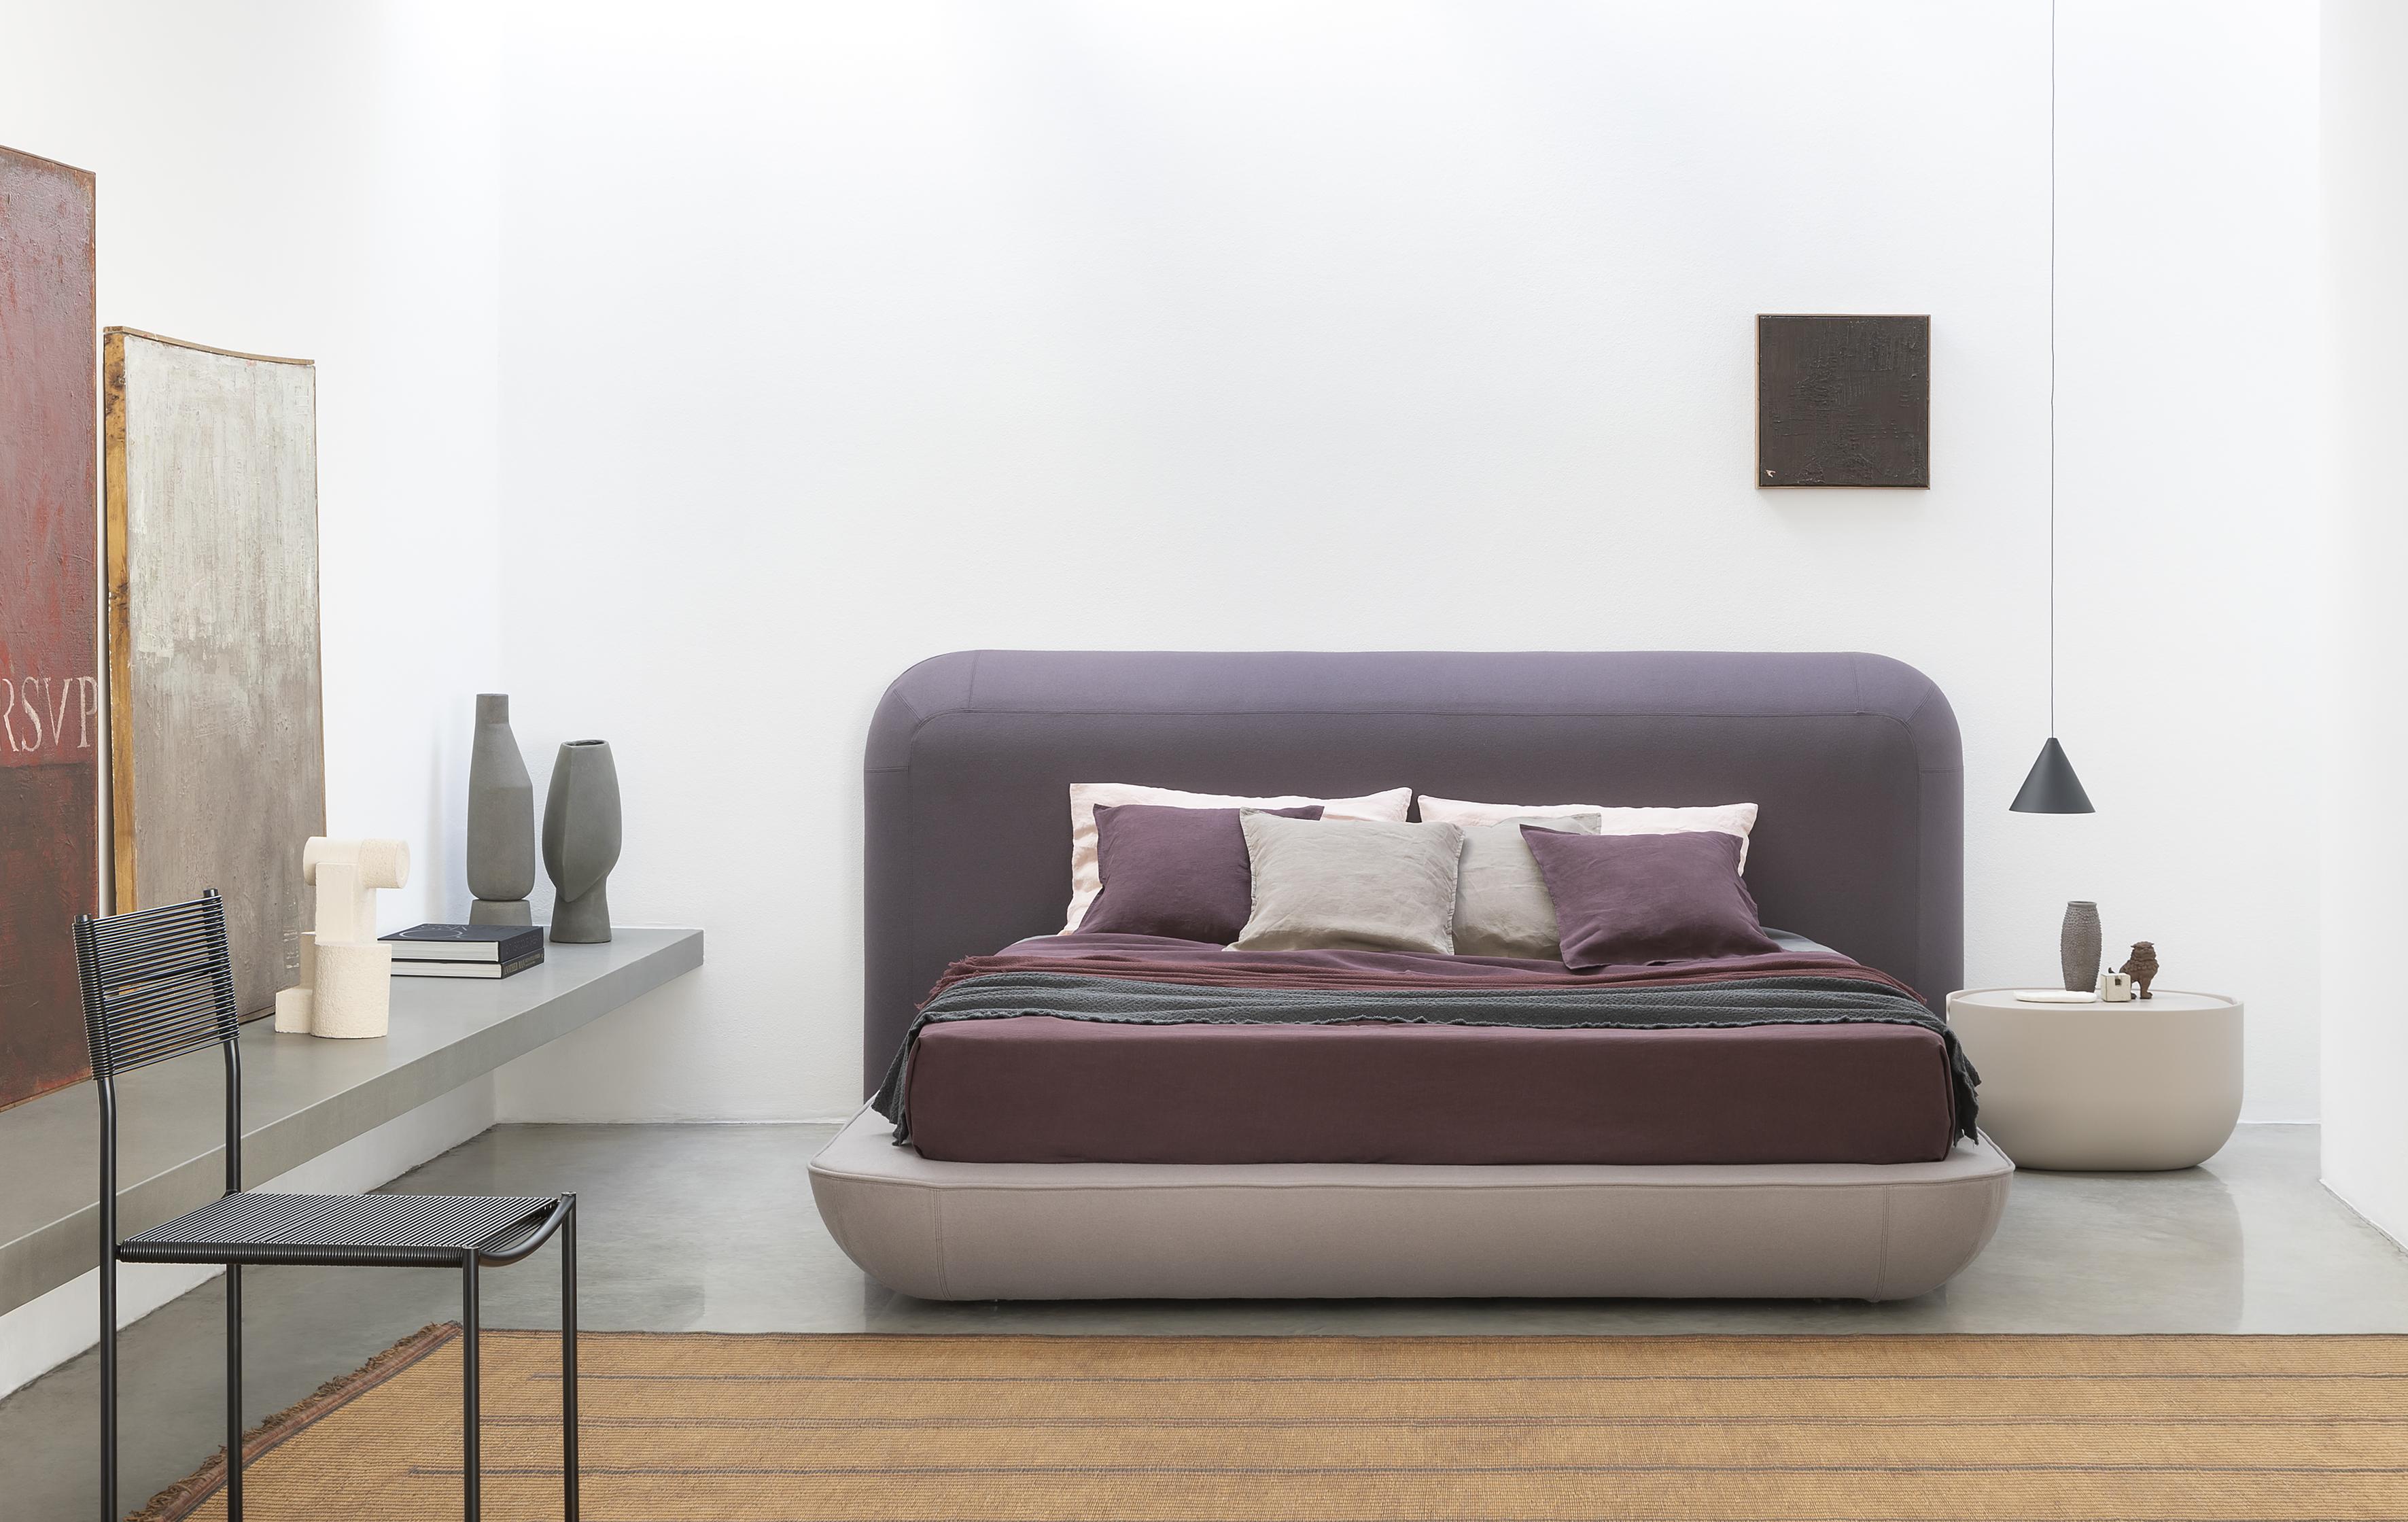 Alias 28A Small Okome Bed with Headboard Upholstered in White by Nendo

Bed with upholstered headbord and structure. Removable cover in eco leather Serge Ferrari®, Alias®, Camira® or Kvadrat® fabric or Pelle Frau® leather. Wooden staves. Mattress